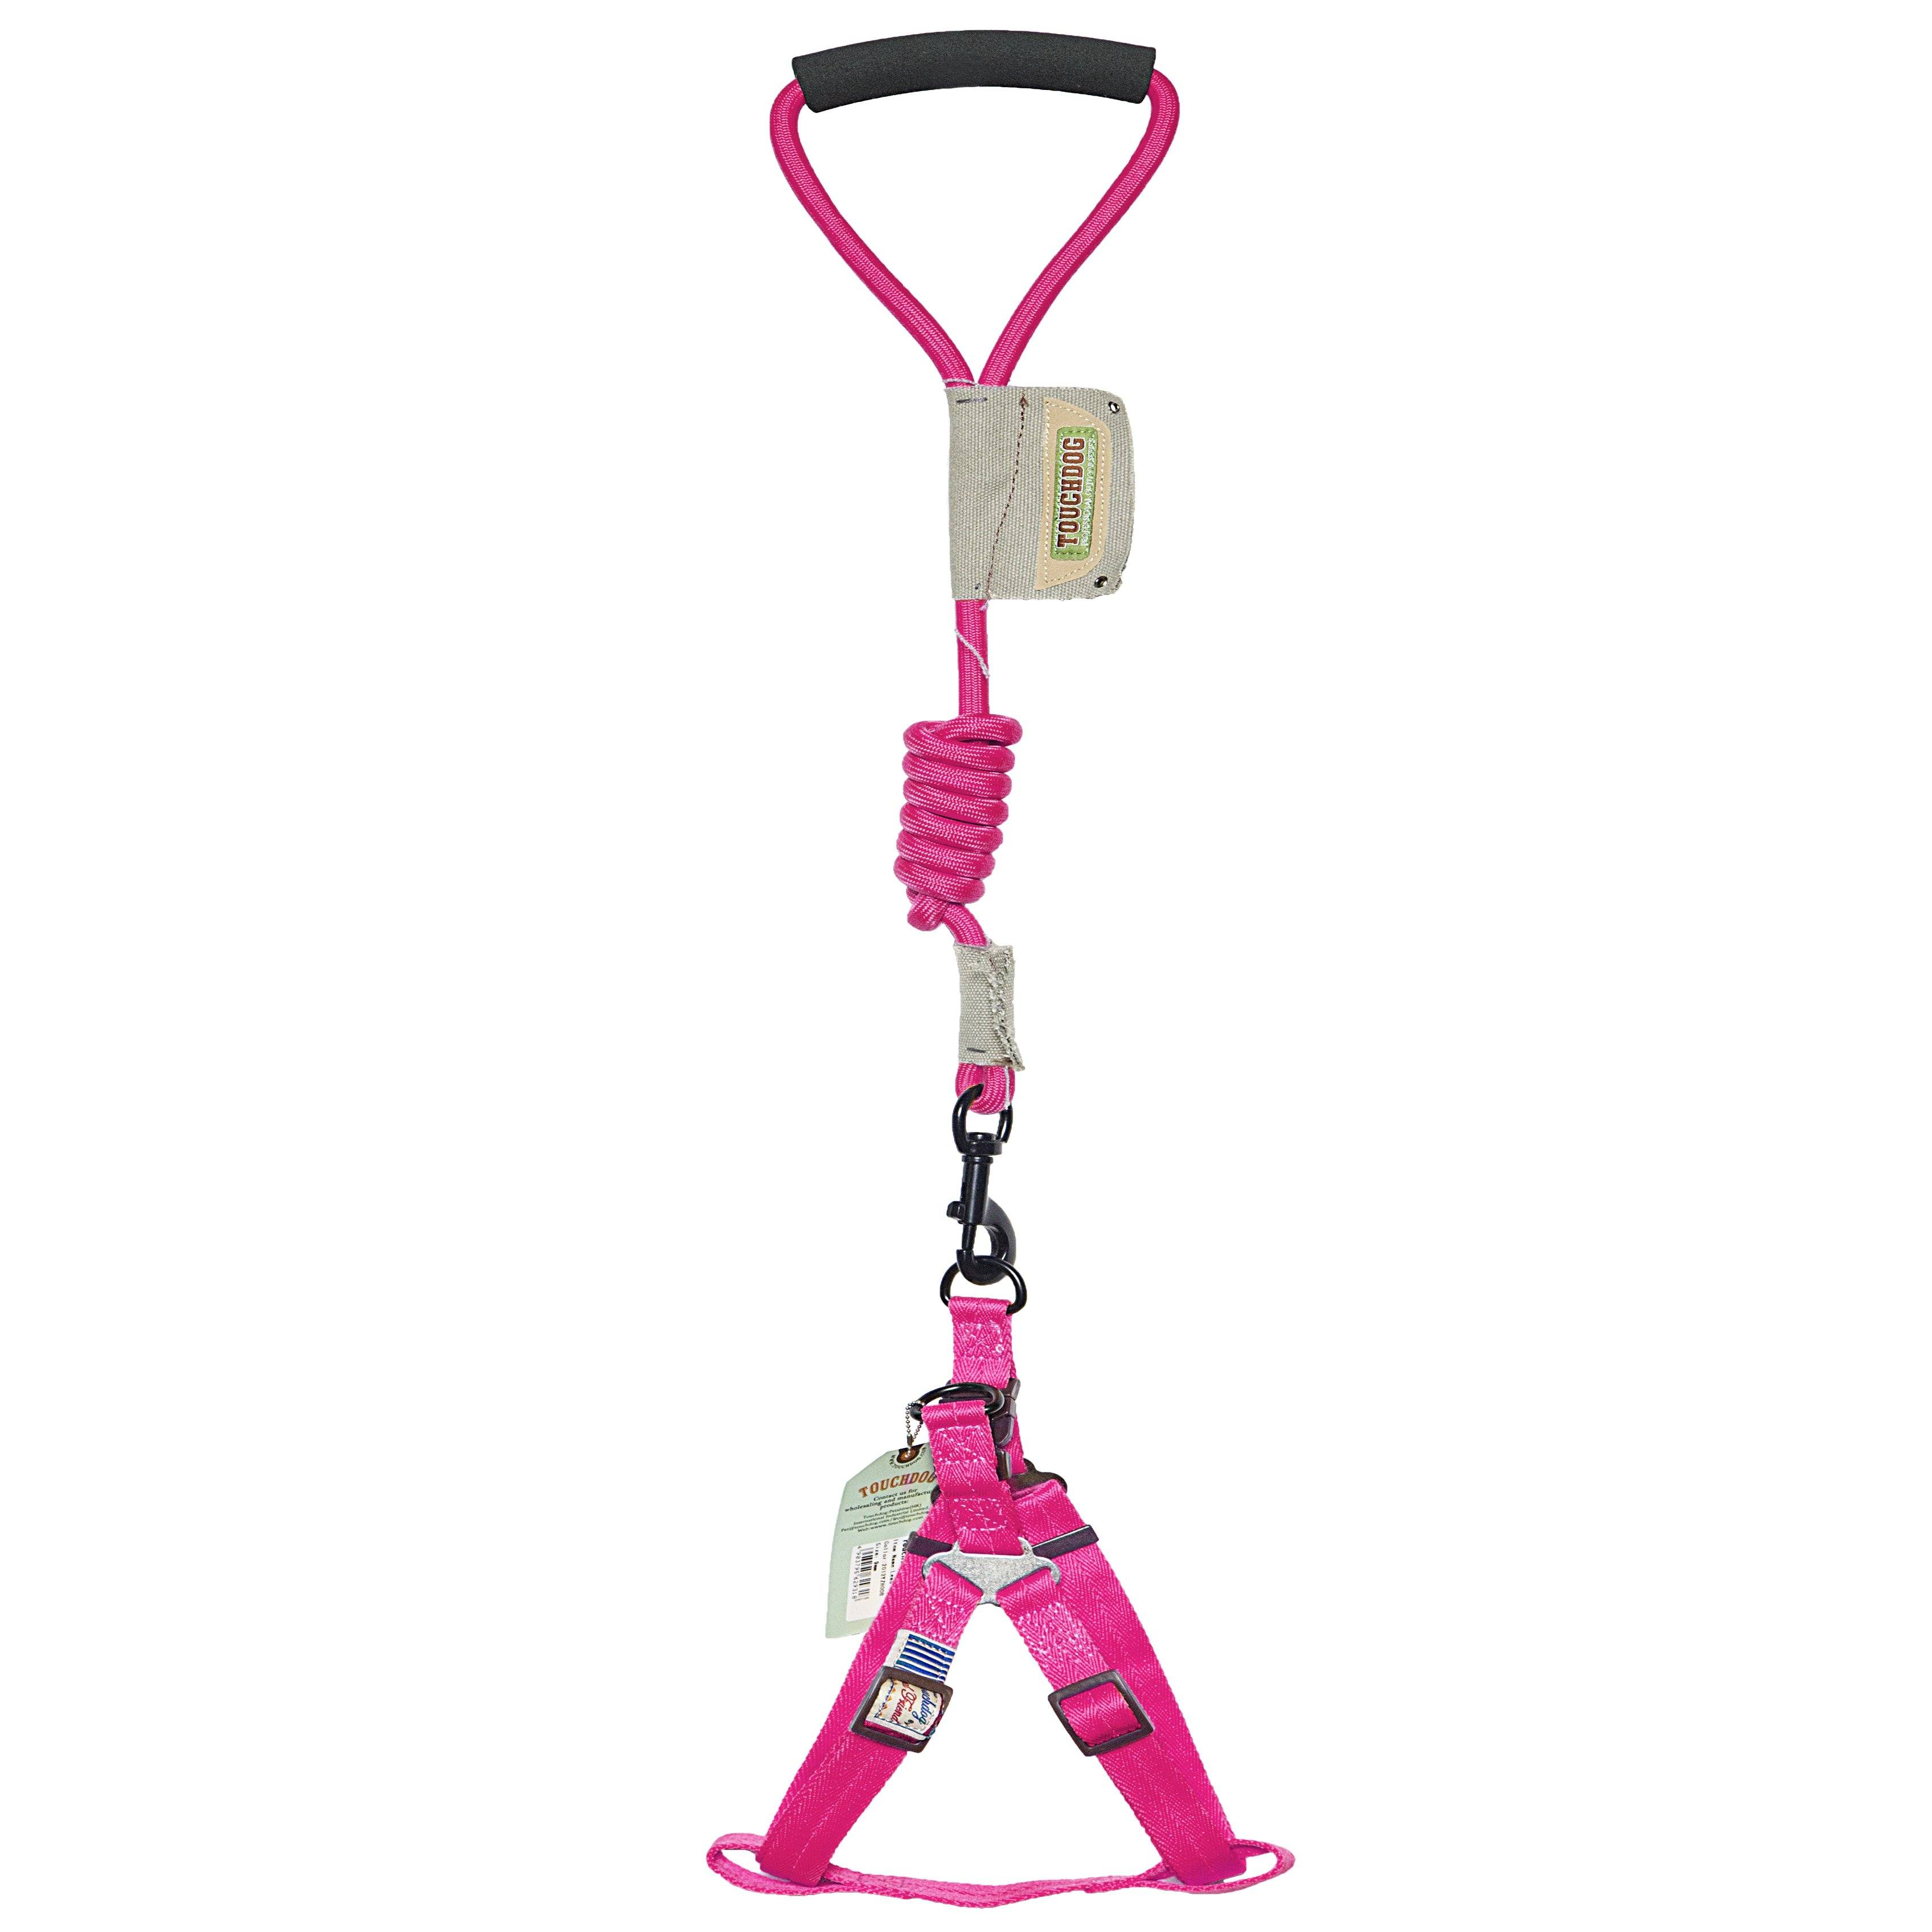 Touchdog Faded-Barker 2-in-1 Fashion Dog Leash and Harness Large Pink